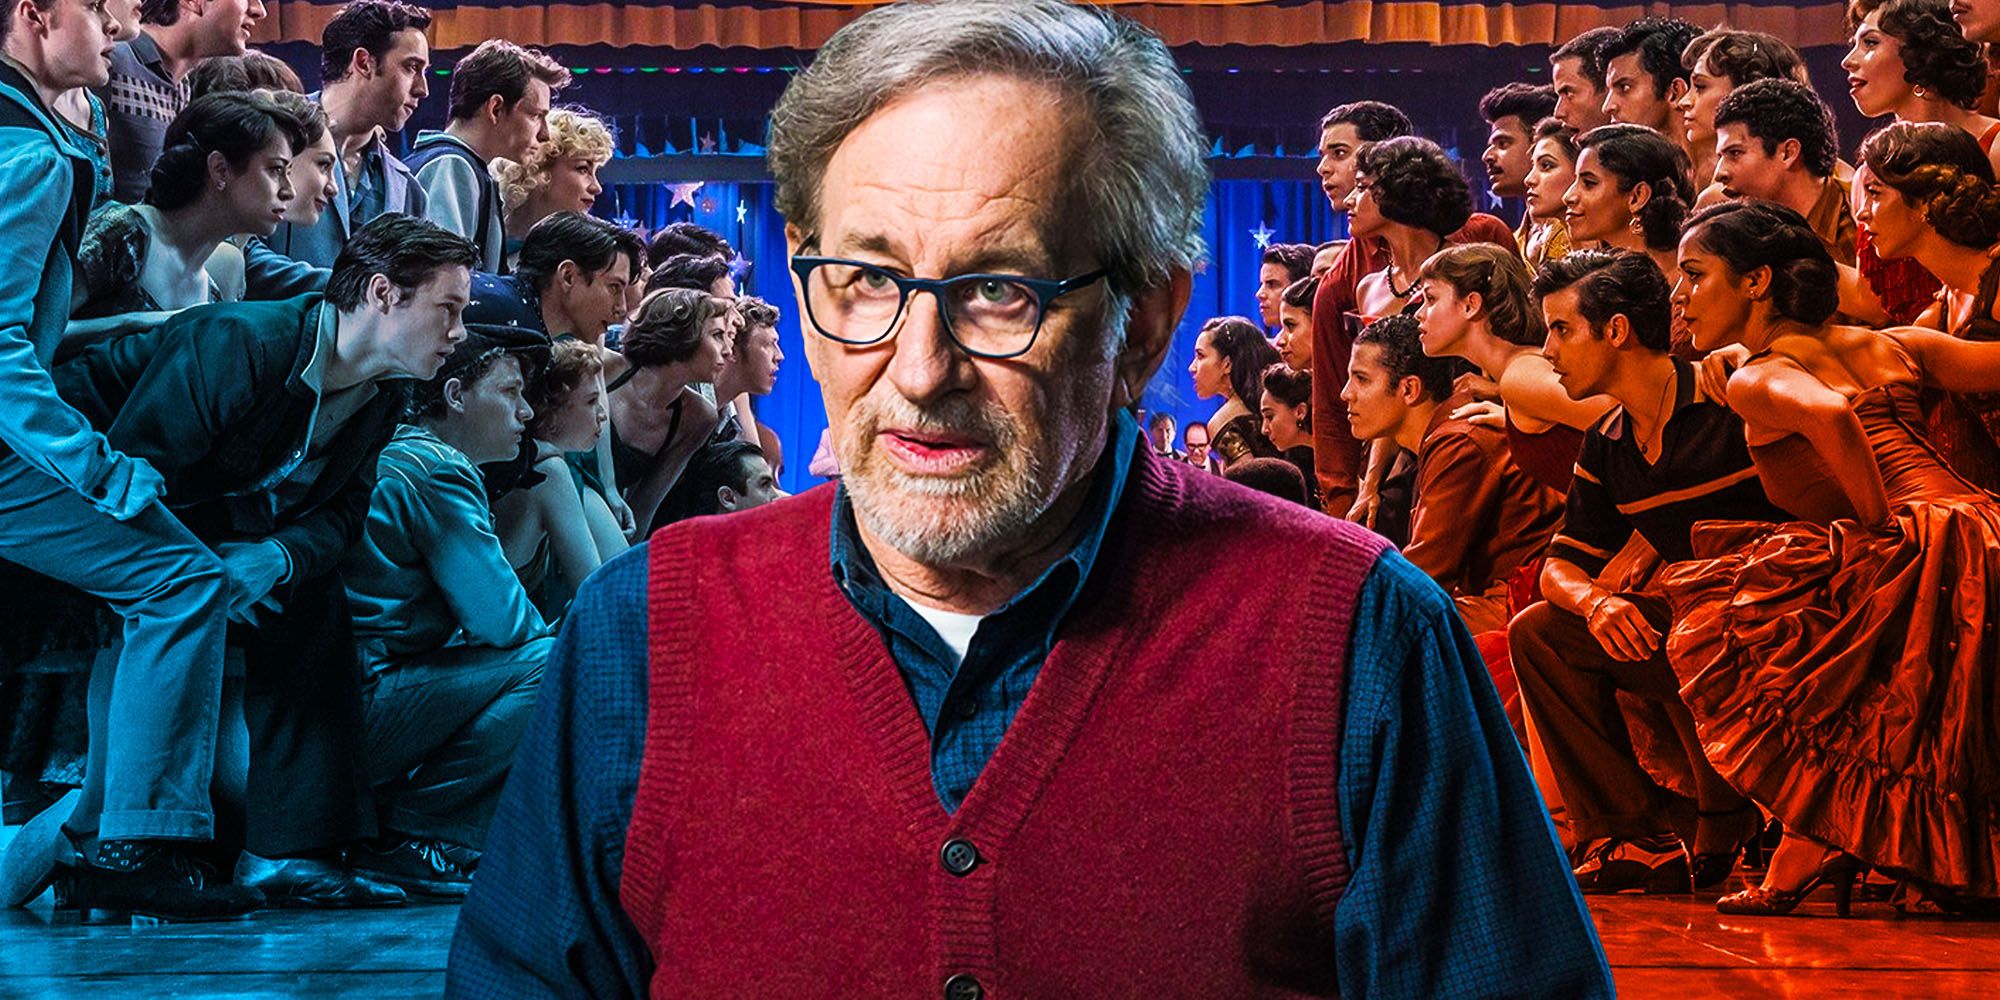 Blended image showing Steven SPielberg and the cast of WSS